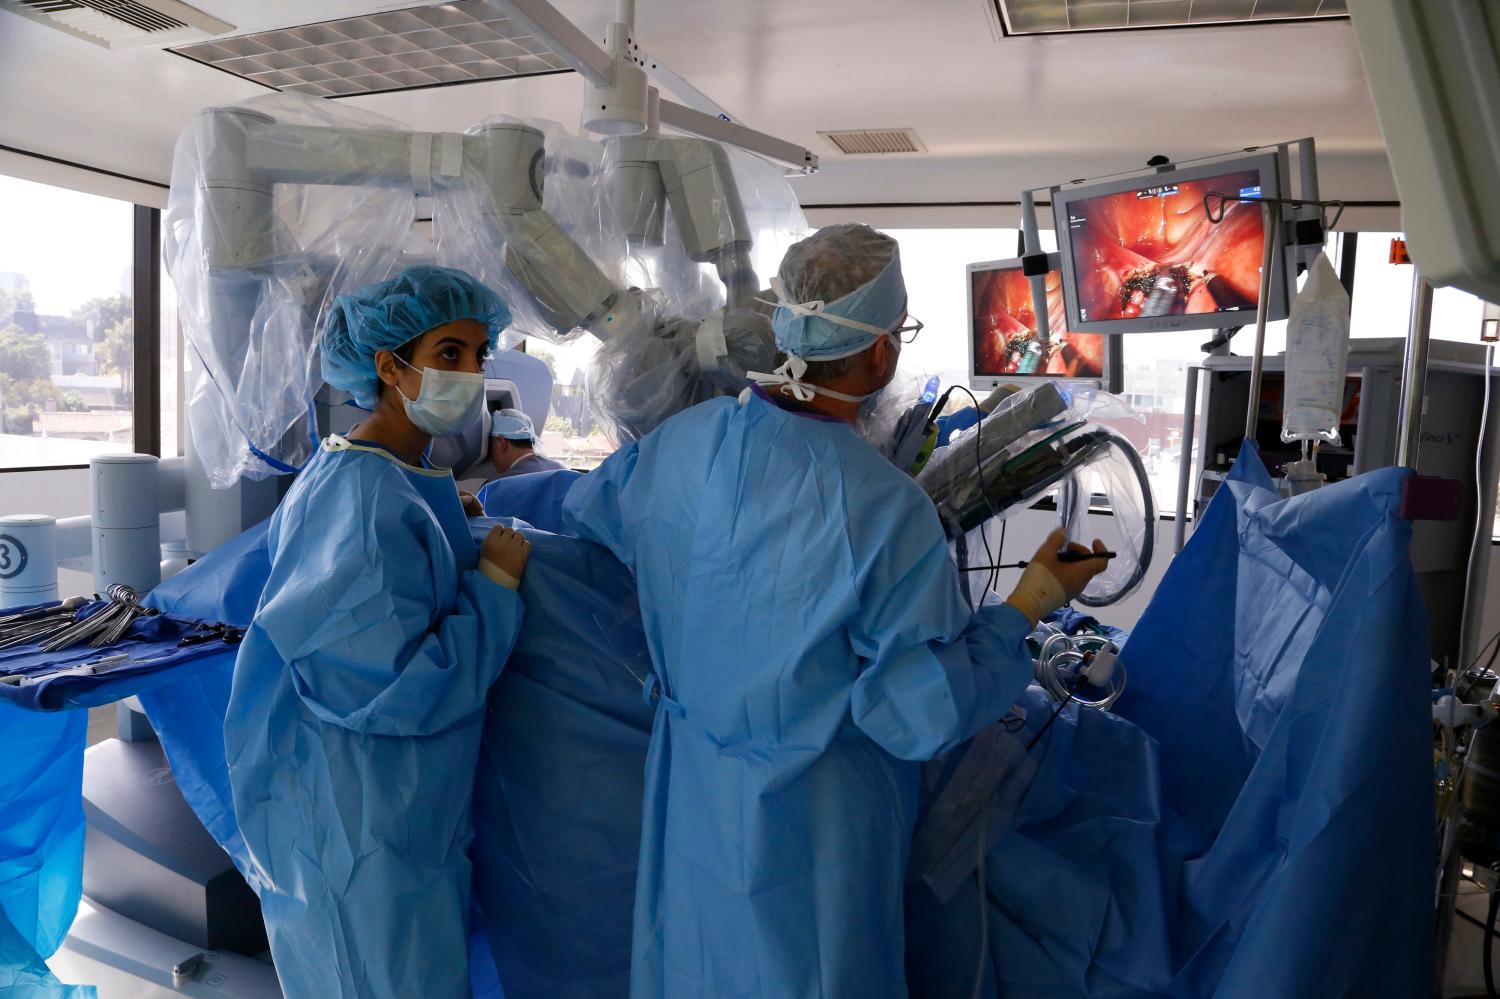 Reuters/Lucy Nicholson - Doctors David Ghozland (2nd L, rear, operating robotic arms from computer) and Marc Winter (R) perform a single-site robotic-assisted hysterectomy at miVIP Surgery Center, in Los Angeles, California April 23, 2014